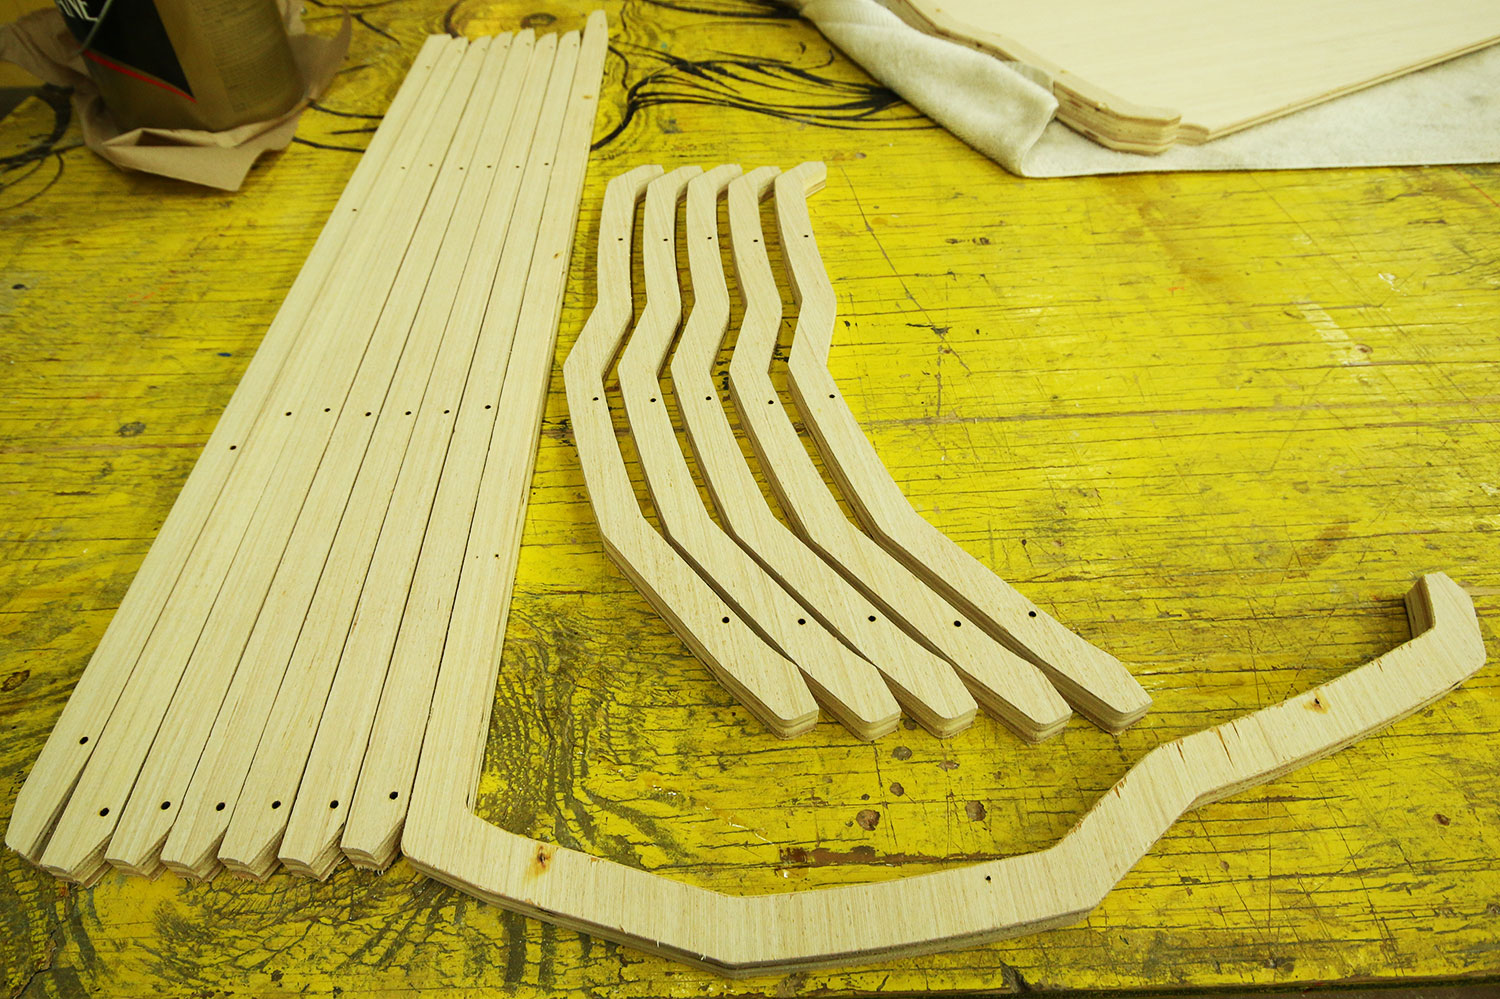 custom cut long and thin wooden pieces laid side by side.